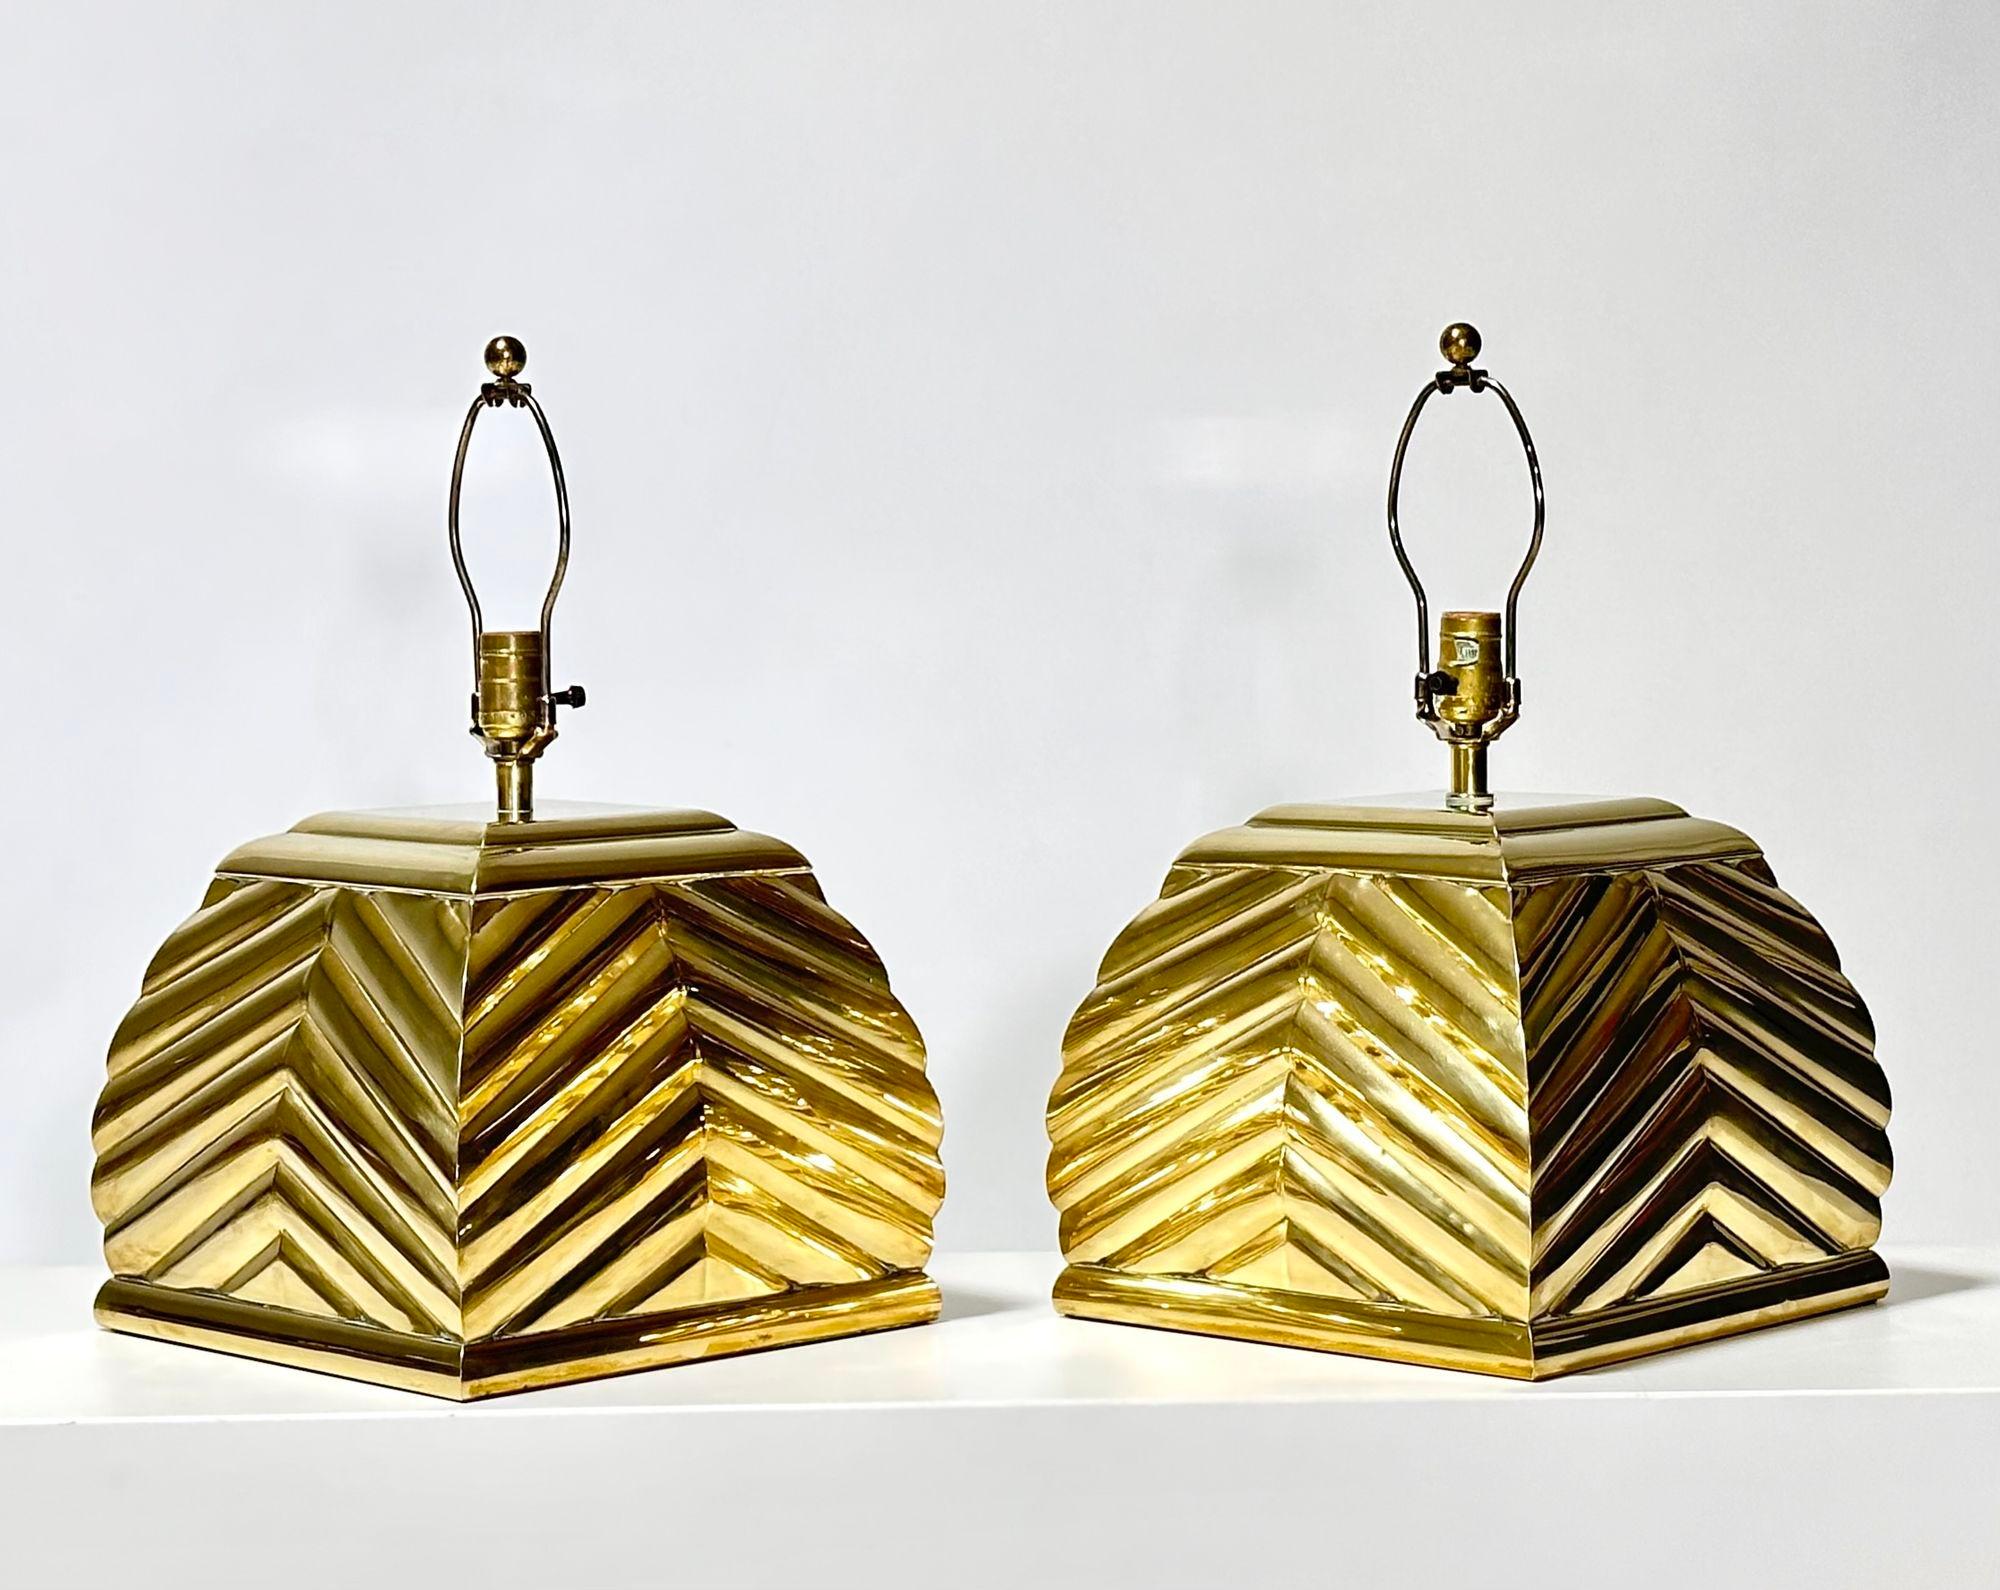 Chapman Pair Brass Sculptural Table Lamps, 1960. Original. Shades not included. There are a couple very small dings on the top of lamp but does not show with the shades.

FREE SHIPPING ANYWHERE IN THE United States